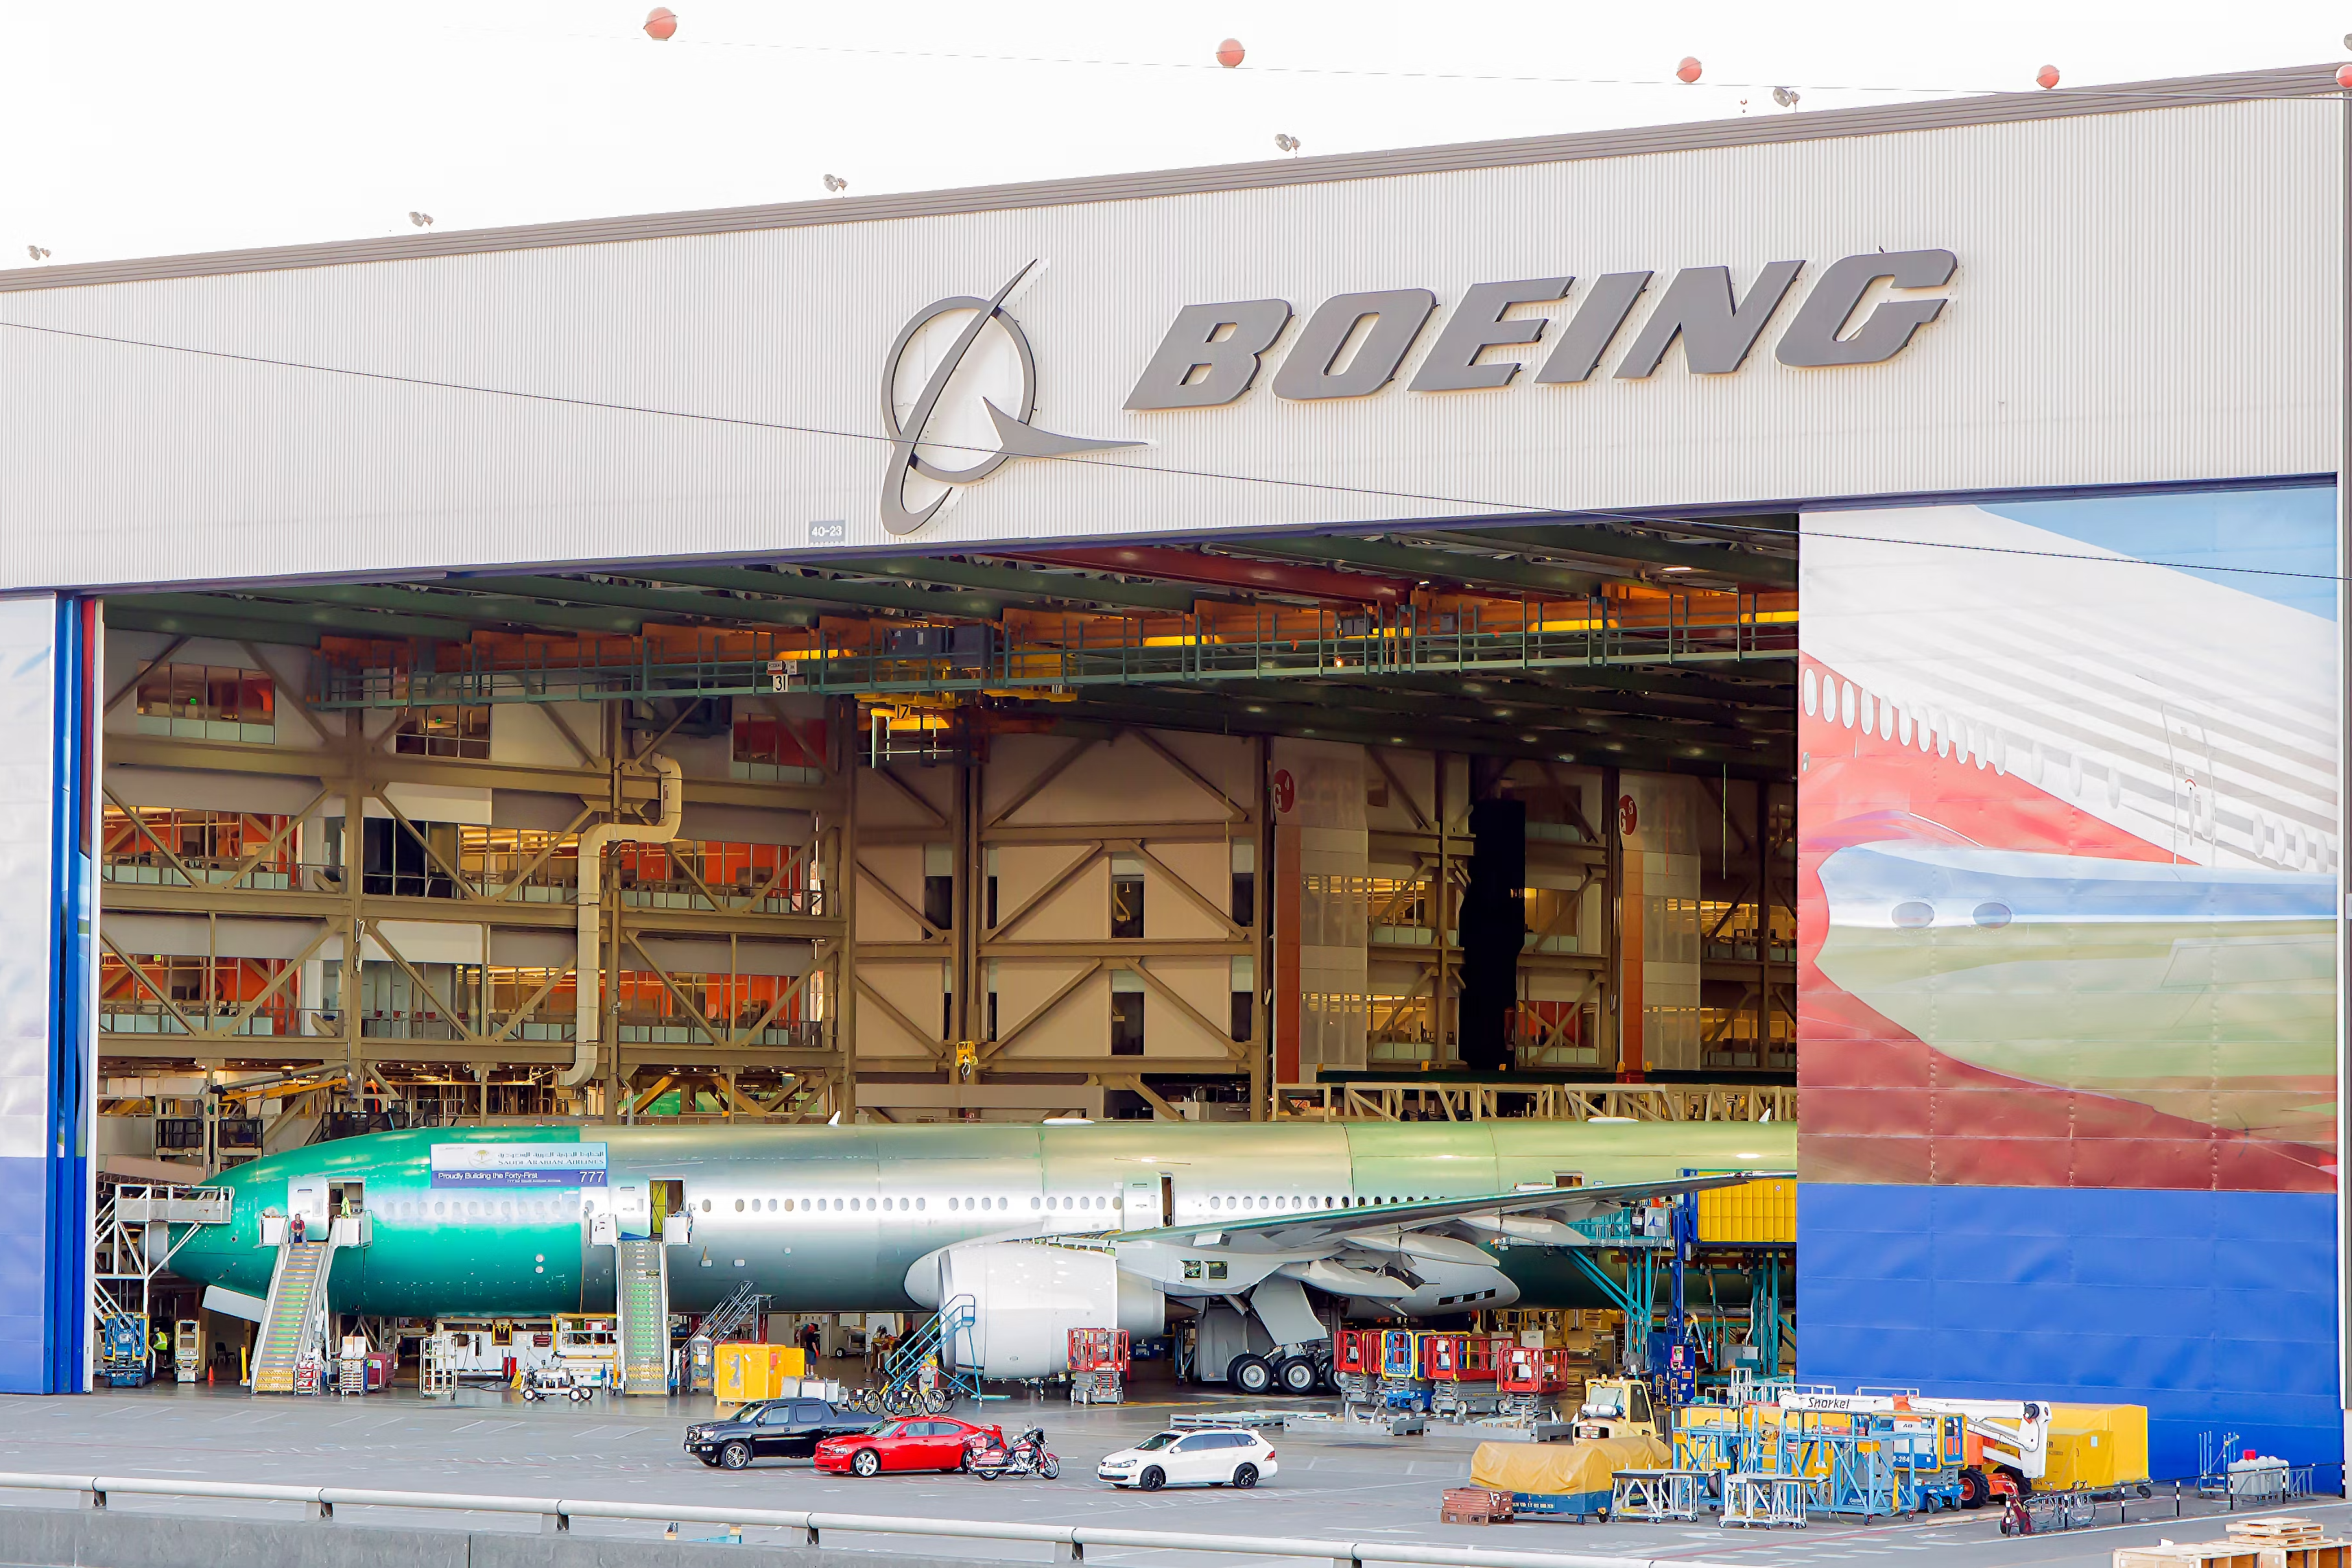 A partially finished plane at the Boeing factory in Everett, Washington